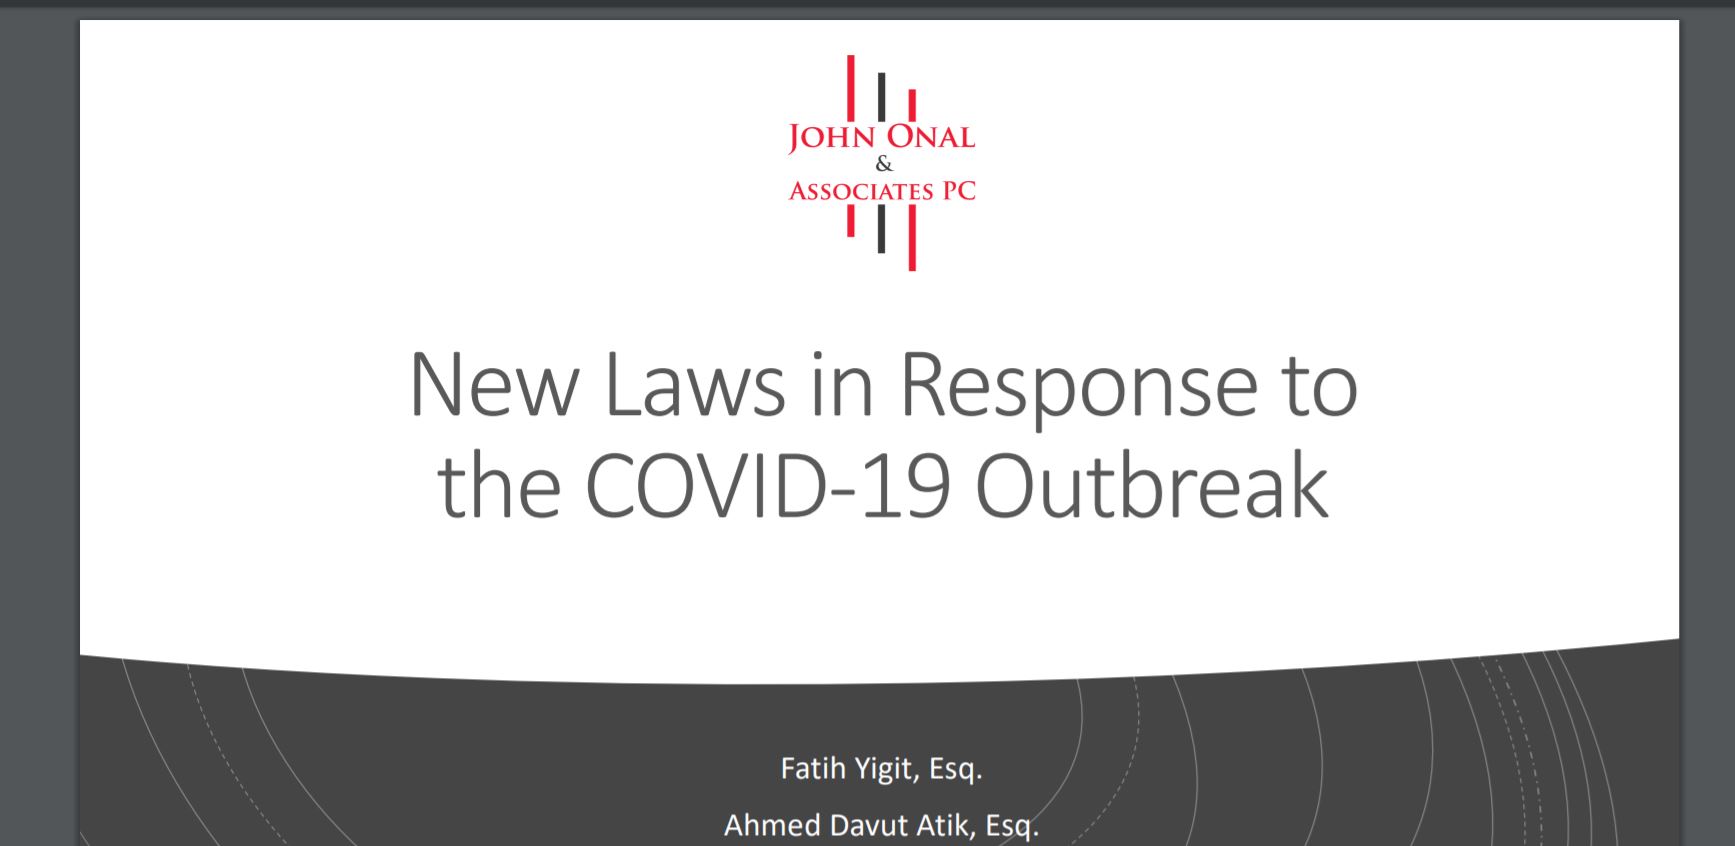 New Laws in Response to the COVID-19 Outbreak